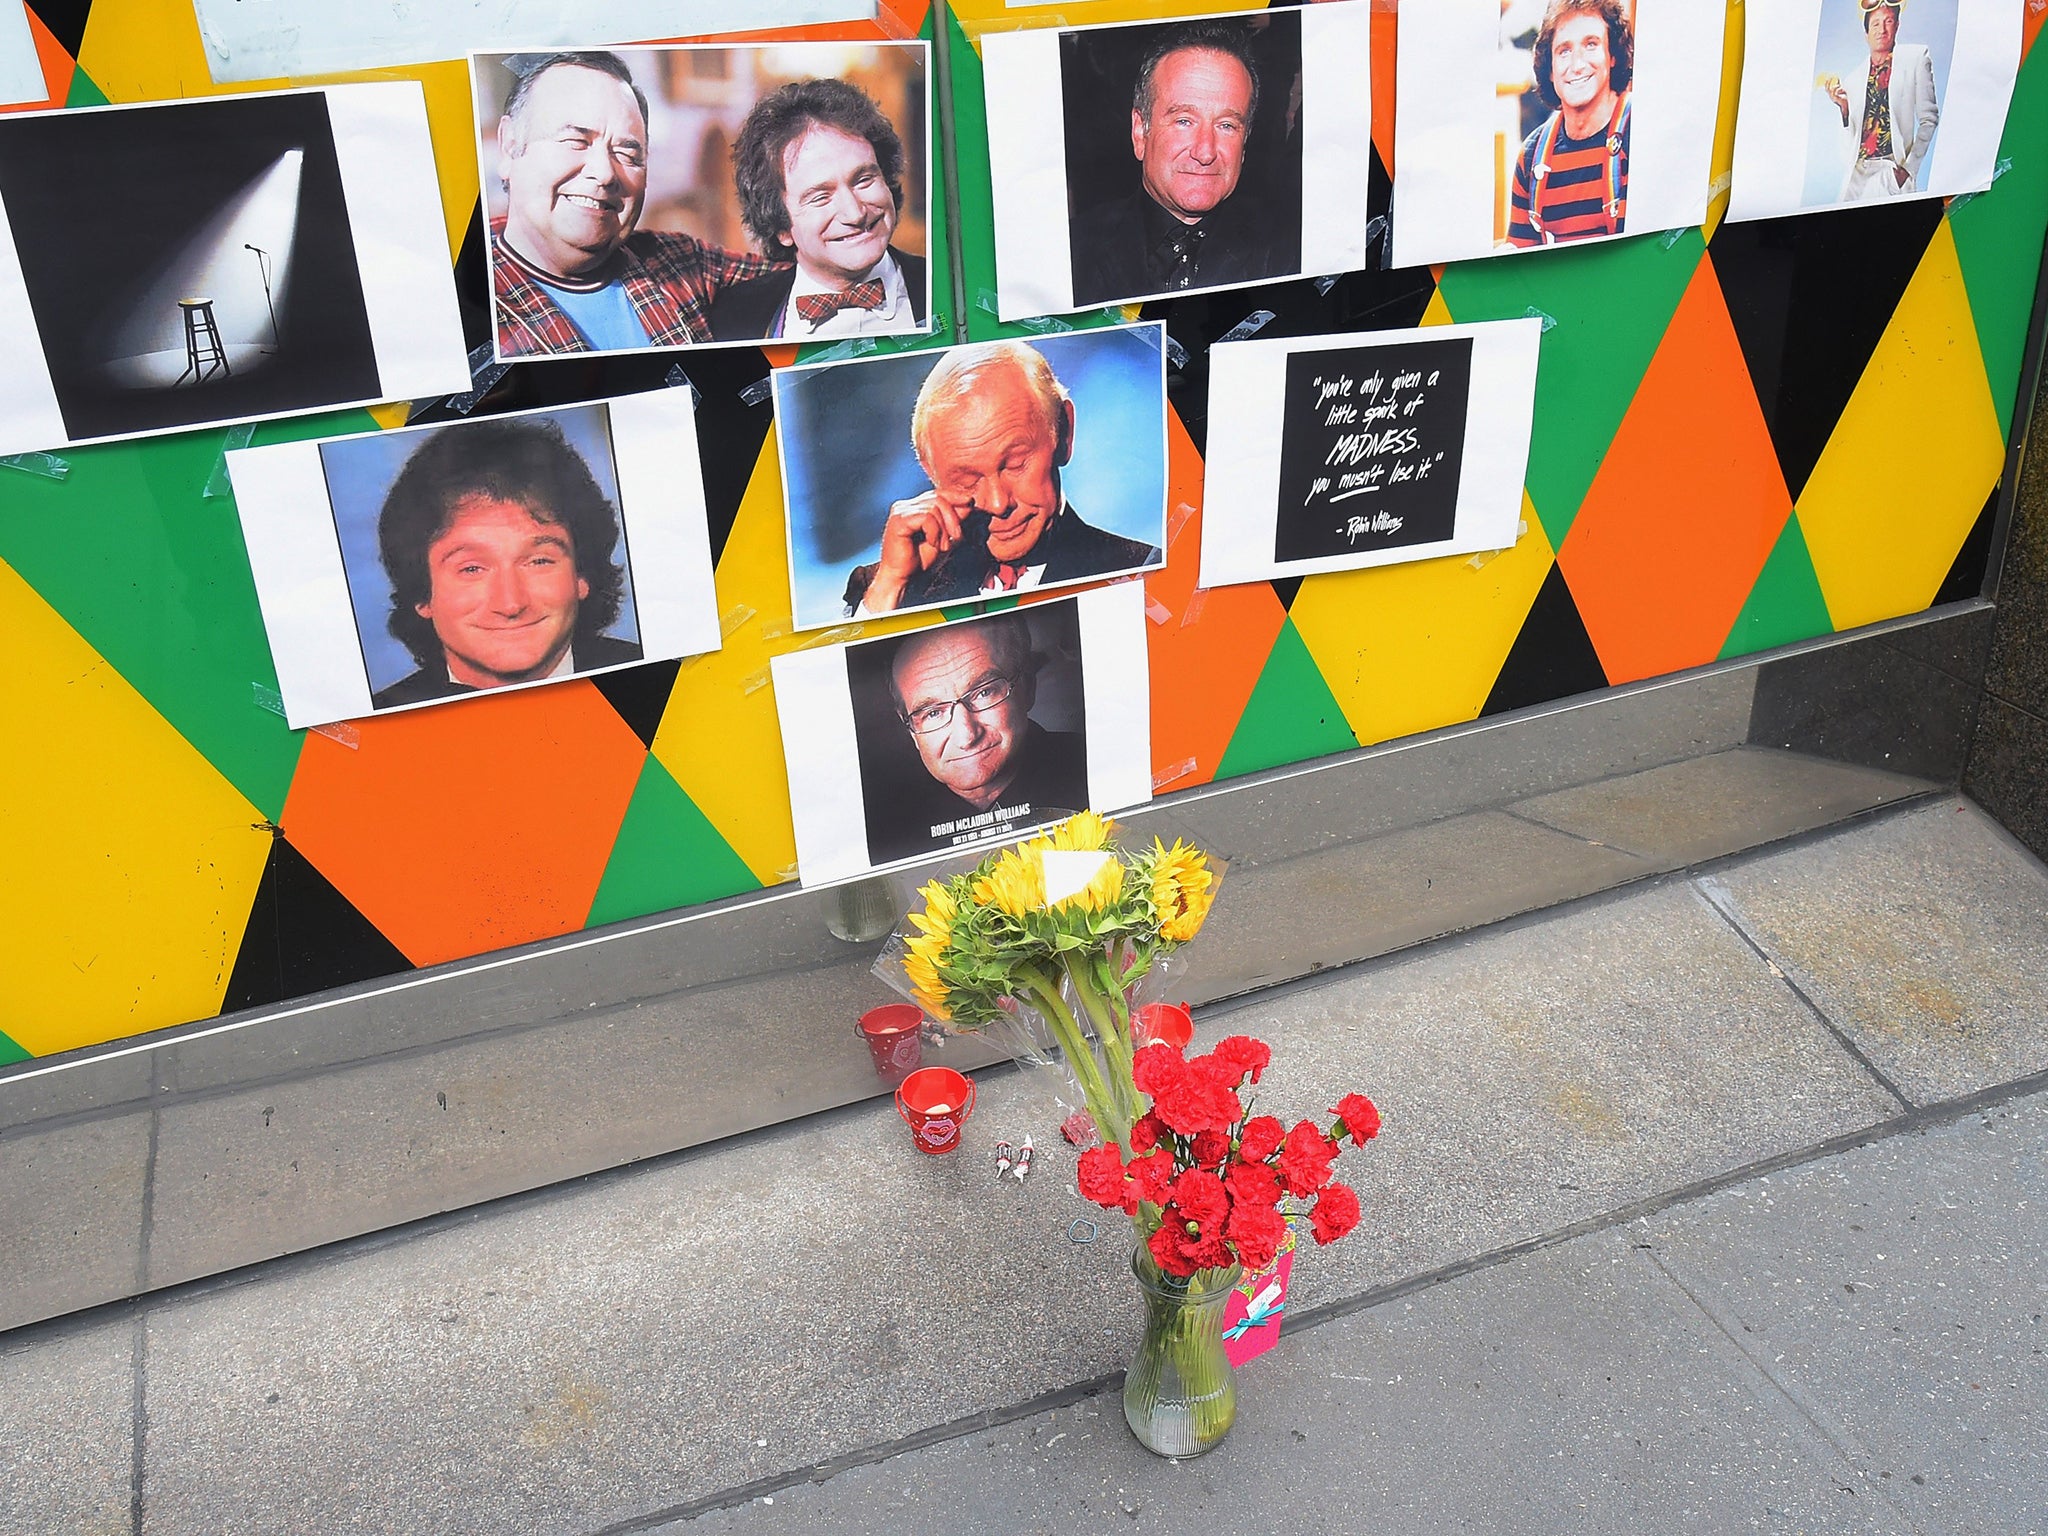 Flowers, tootsie rolls, a card, and a candle are placed in memory of Robin Williams in front of Carolines on Broadway comedy club in New York City